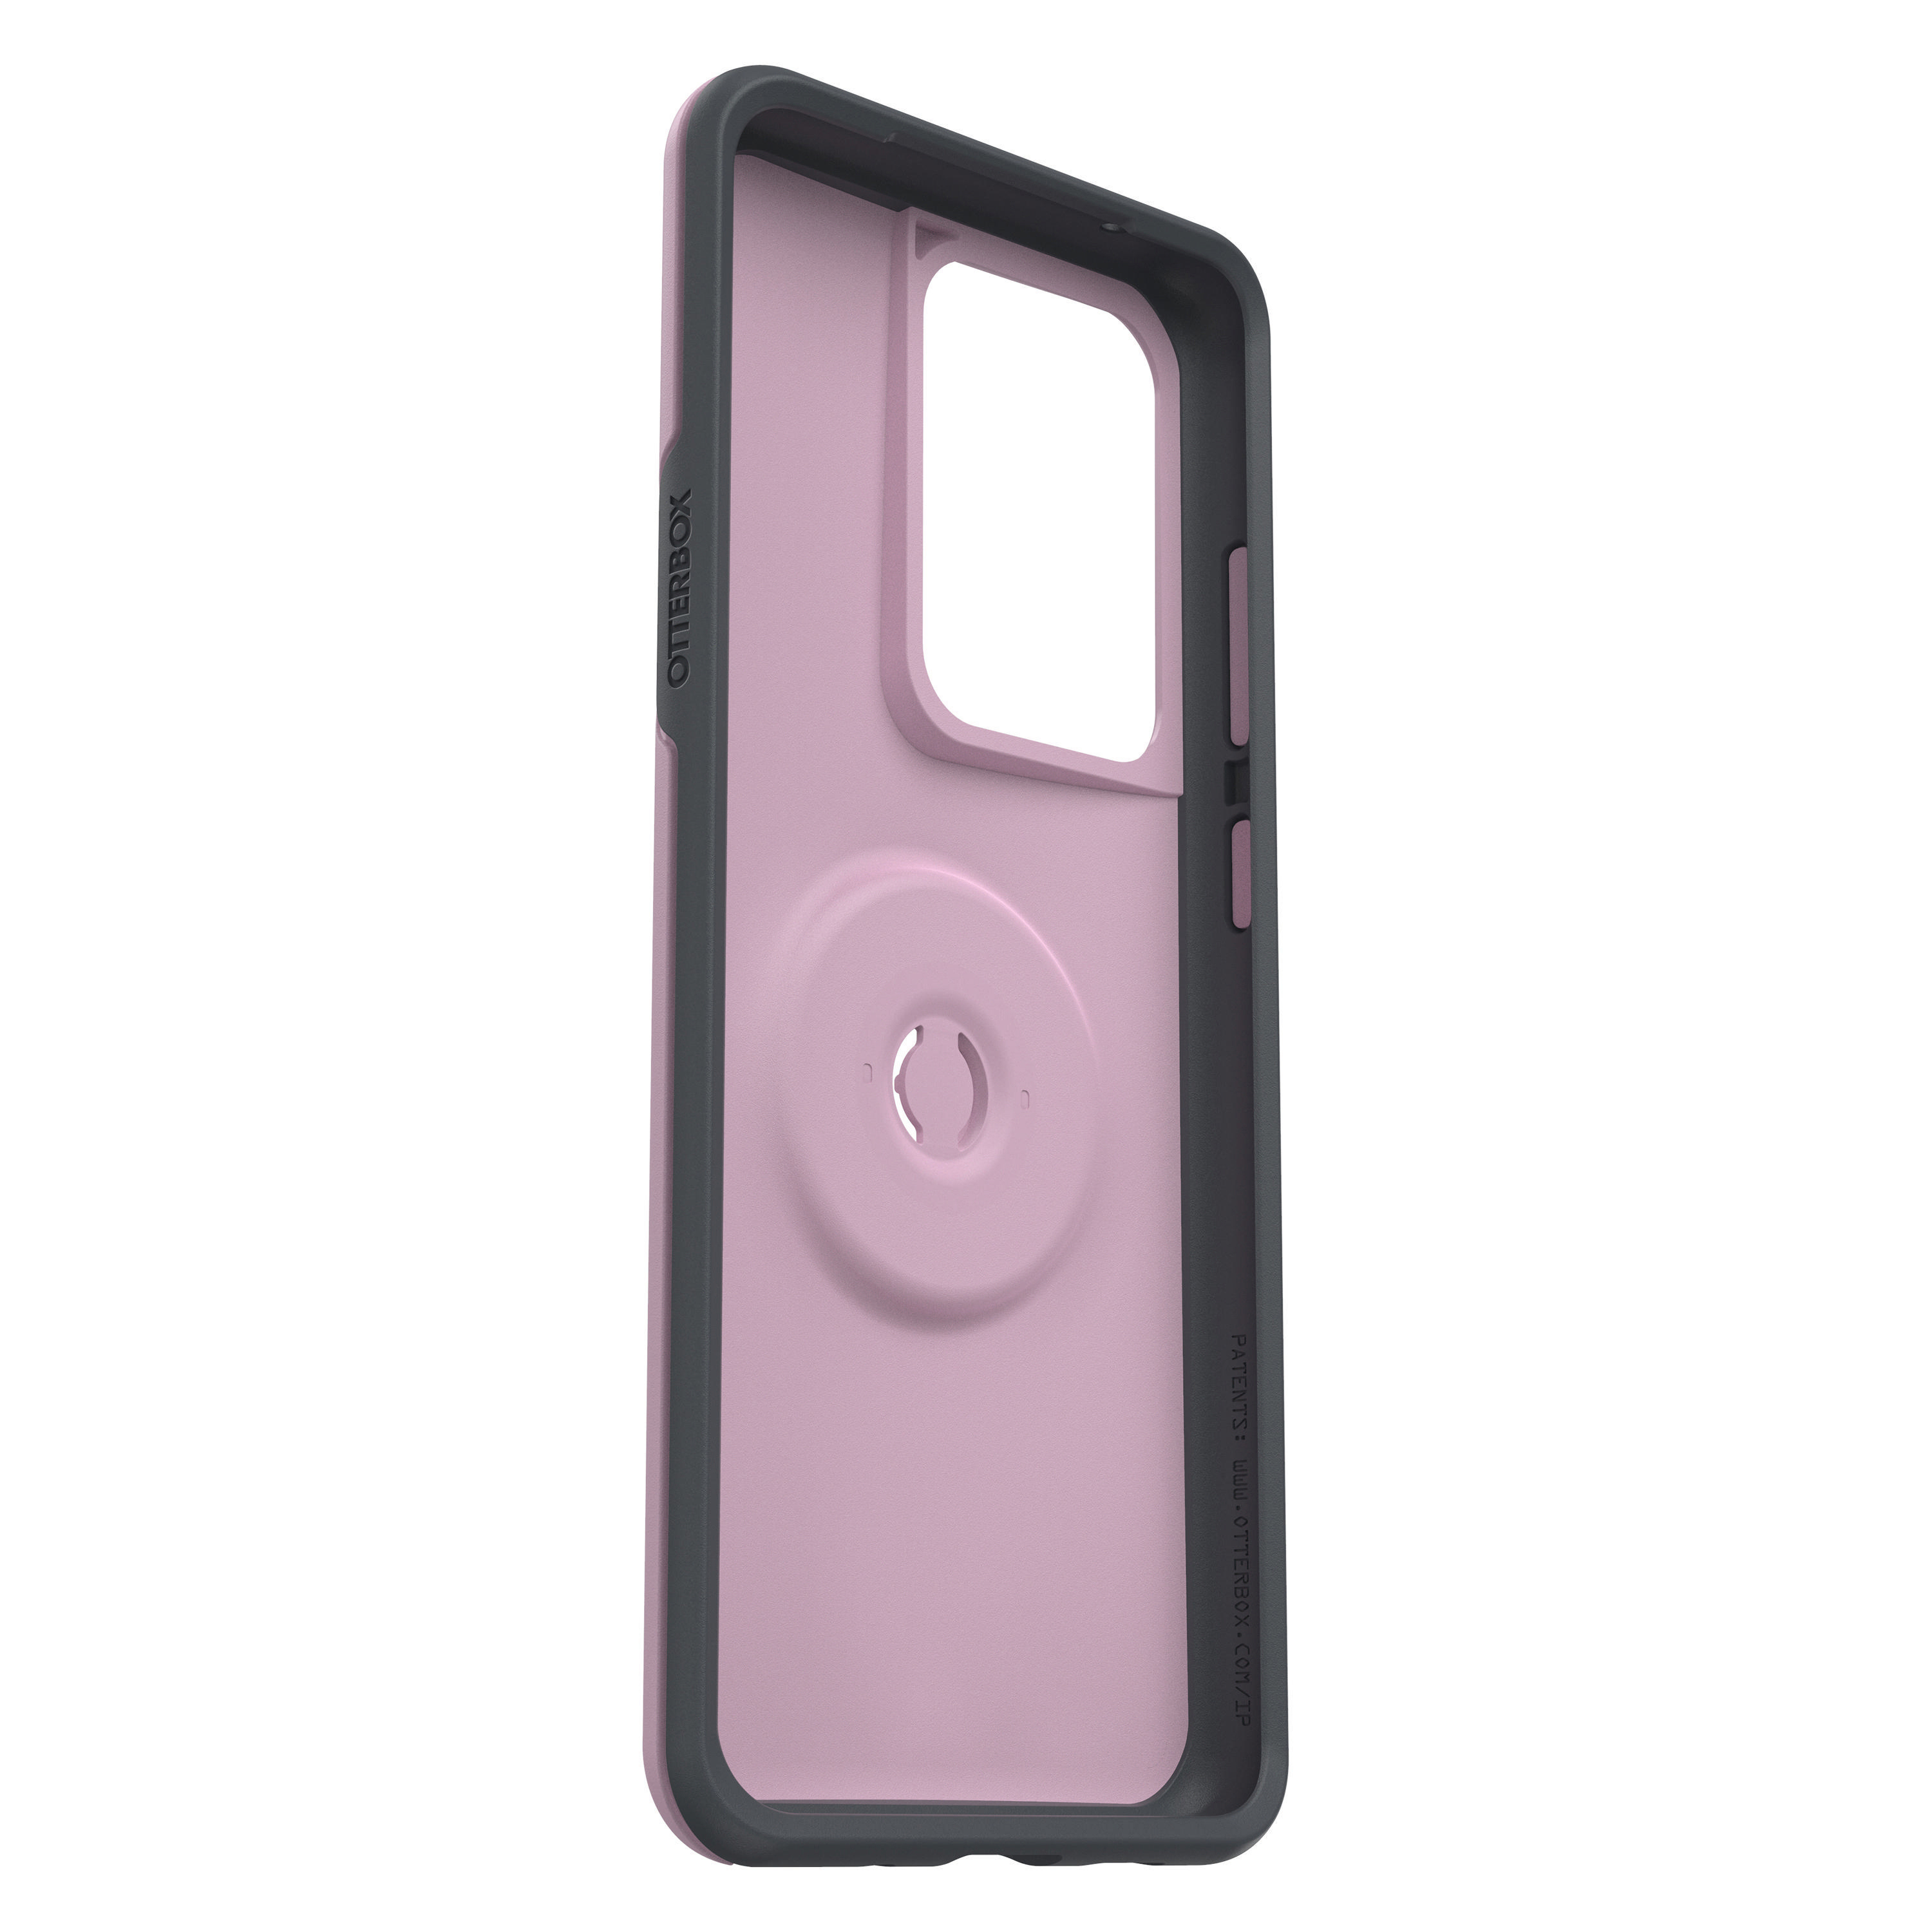 OTTERBOX 77-64239, Backcover, Samsung, Ultra, Galaxy S20 Pink